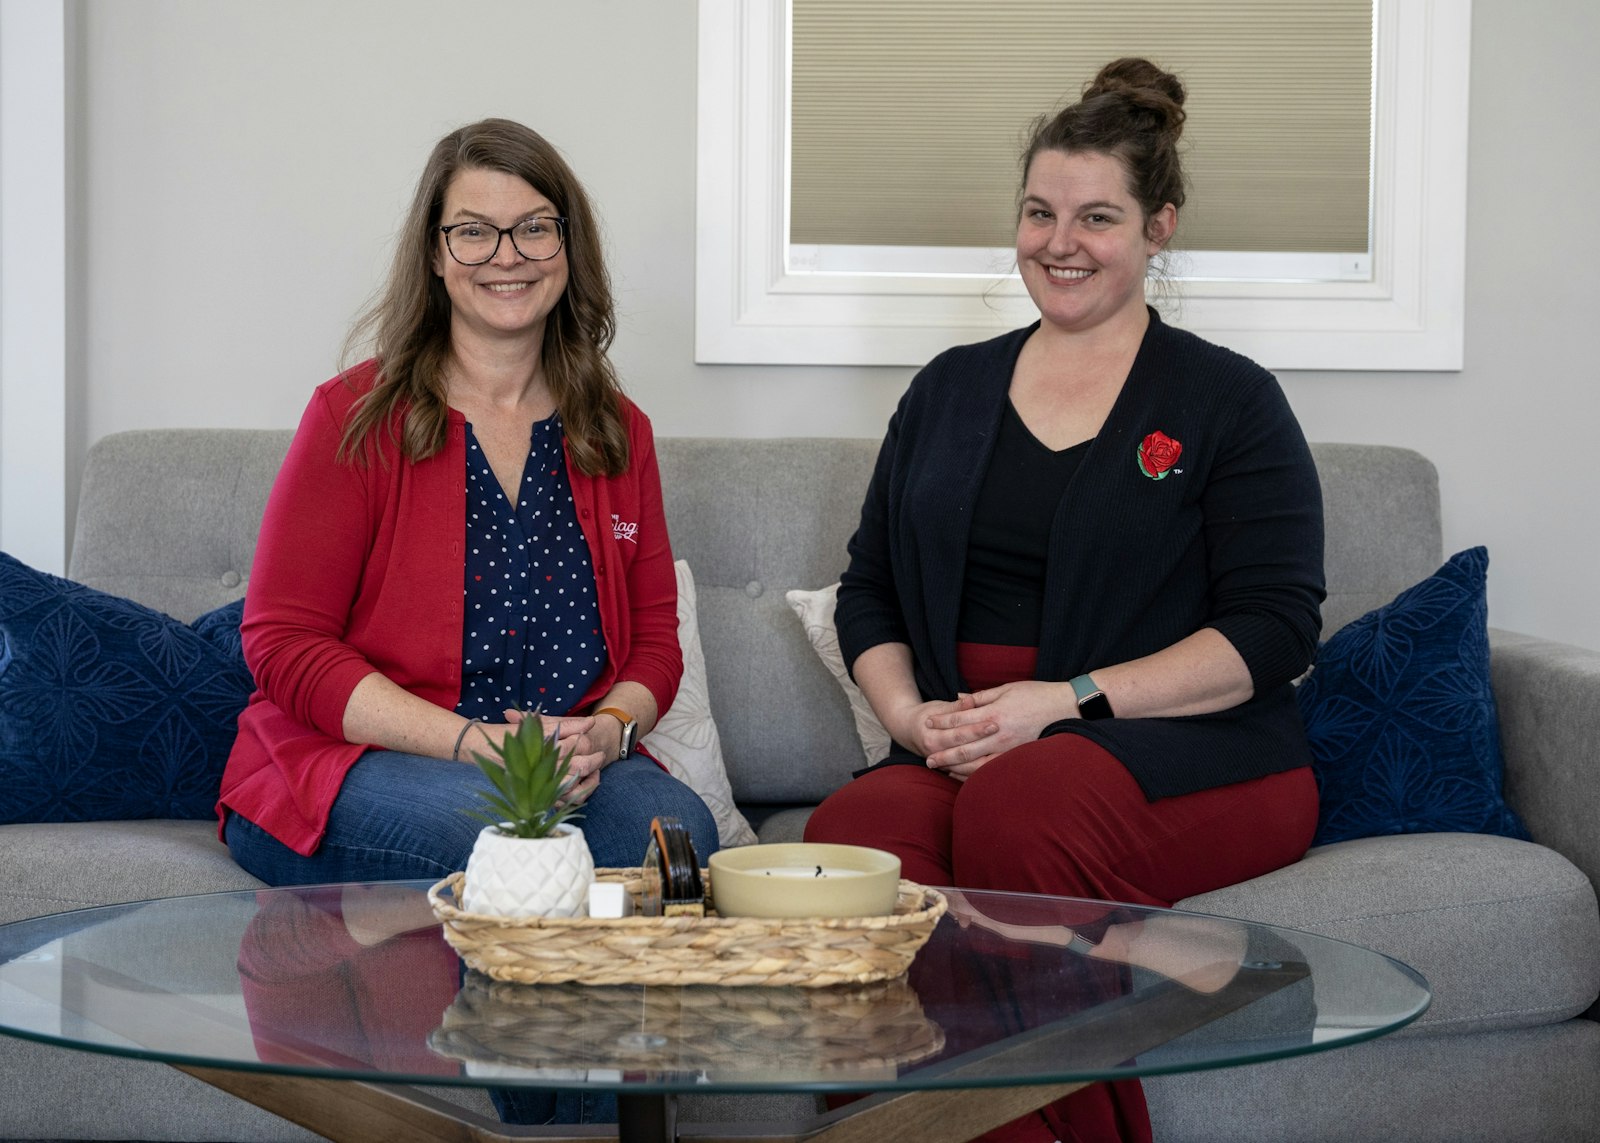 Jessie Wiegand, director of marketing and creative, and Alonna Hunt, the group's parish outreach coordinator, said the apostolate seeks to provide "very qualified experts" to speak on a variety of marriage-related topics, seeking to incorporate real couples' experiences to help make the courses relatable.